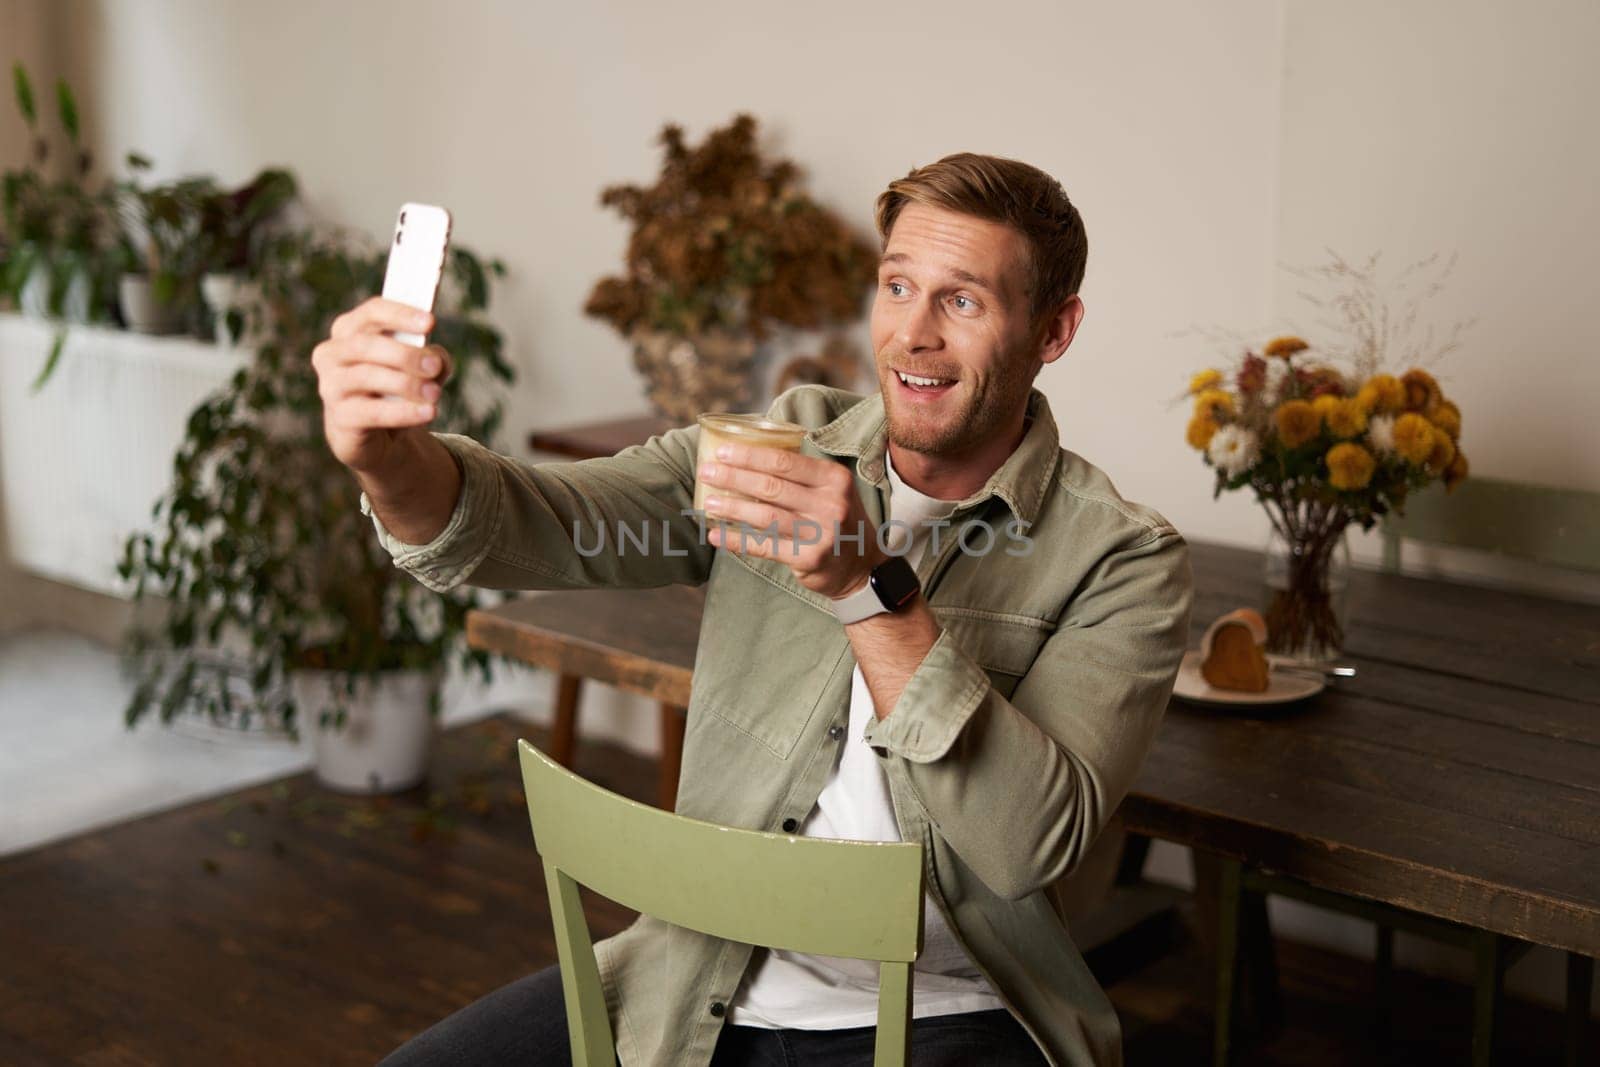 Portrait of handsome happy young man, taking selfie in cafe, posing with cup of coffee, video chats using smartphone app, talks to a friend. Lifestyle and leisure concept